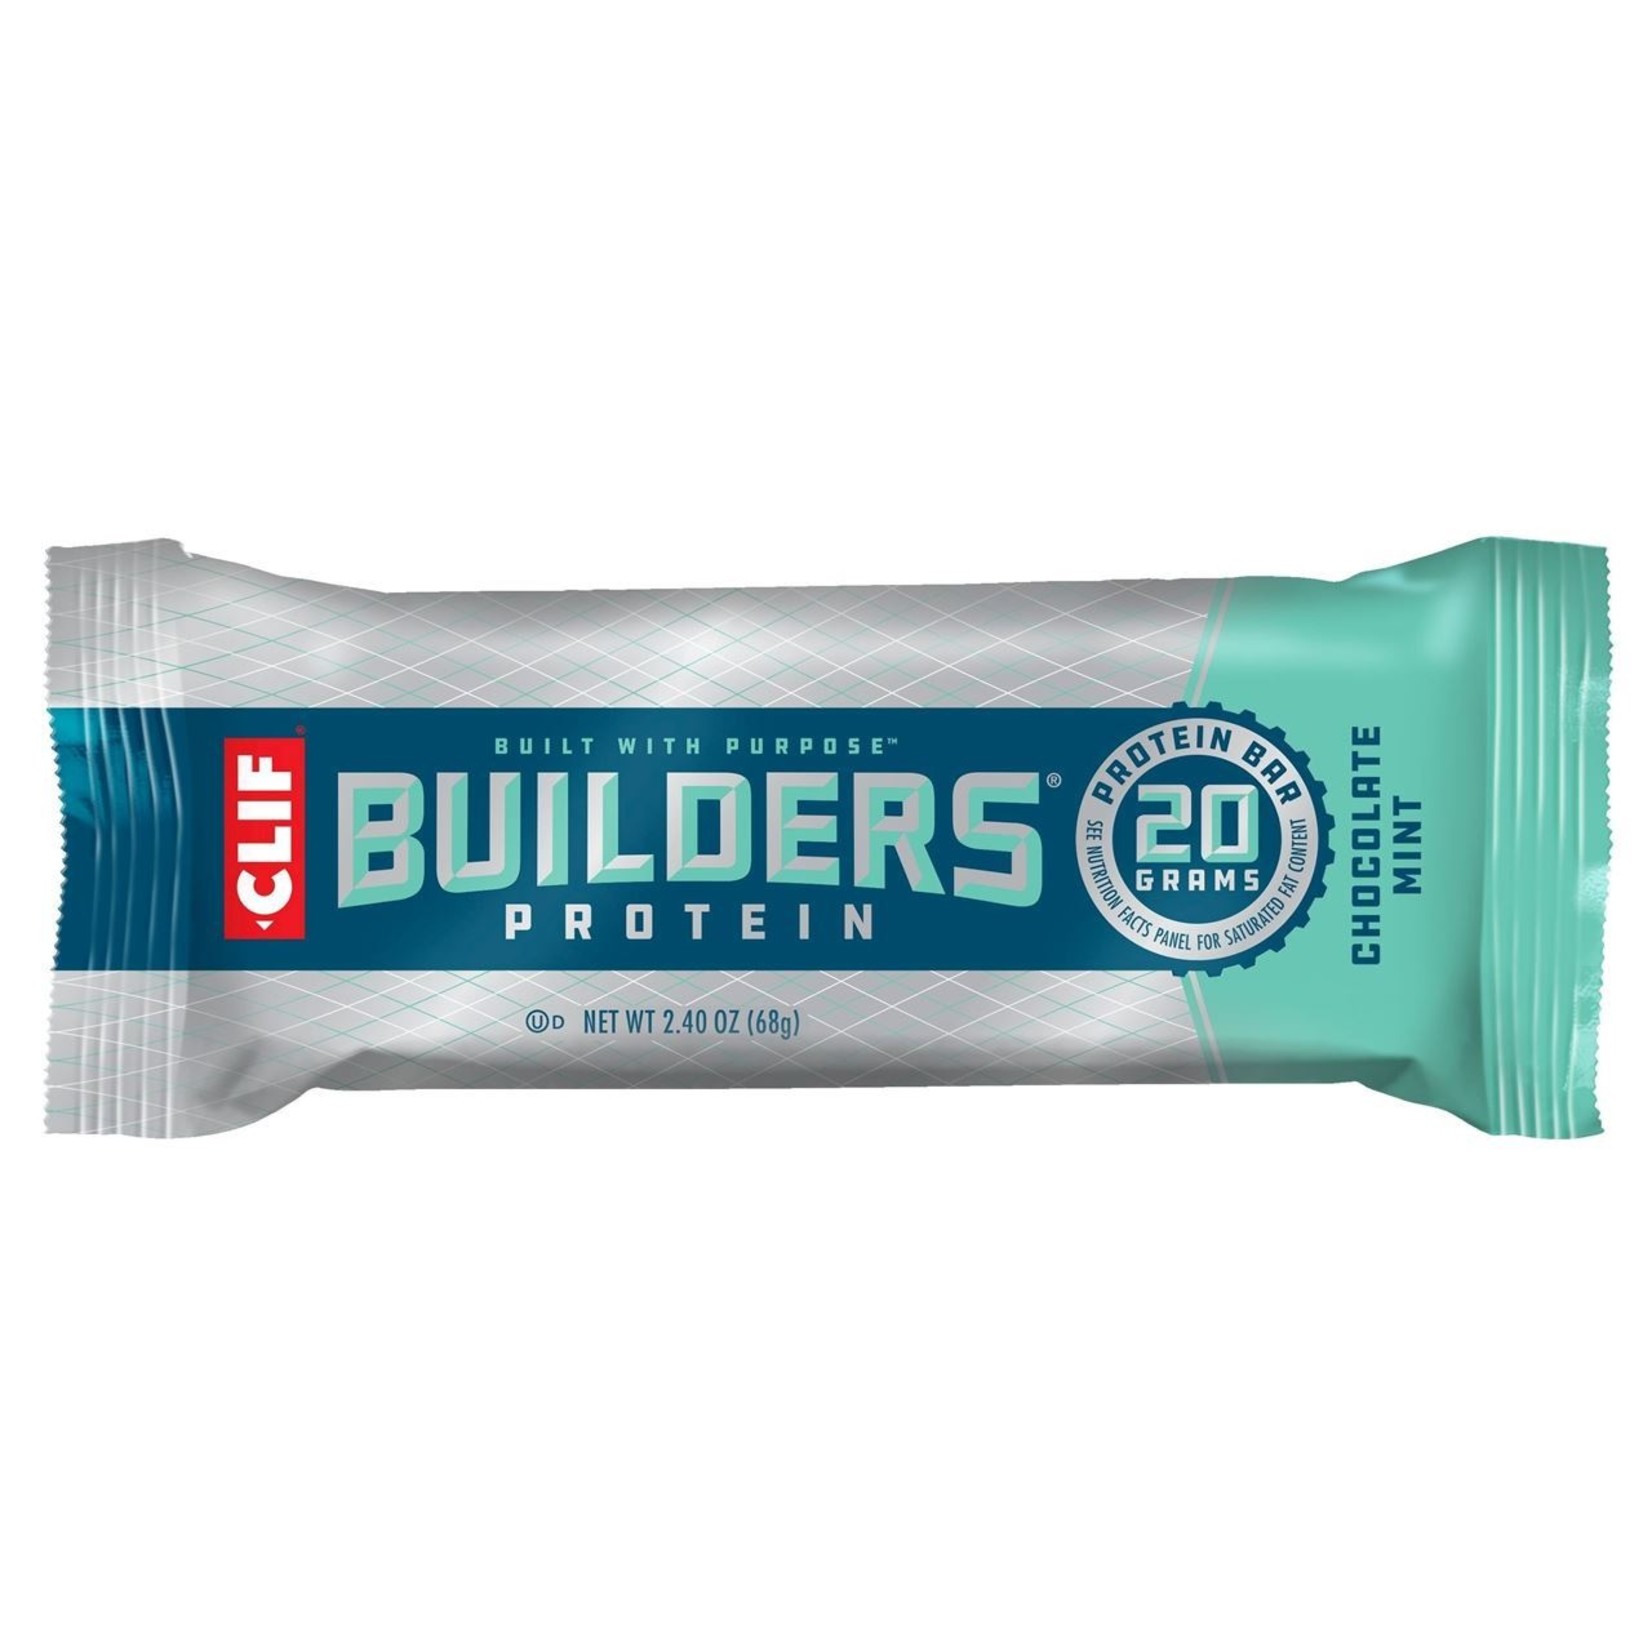 Clif Clif Builder Protein Chocolate Mint Bar - Pack of 12- Gluten Free